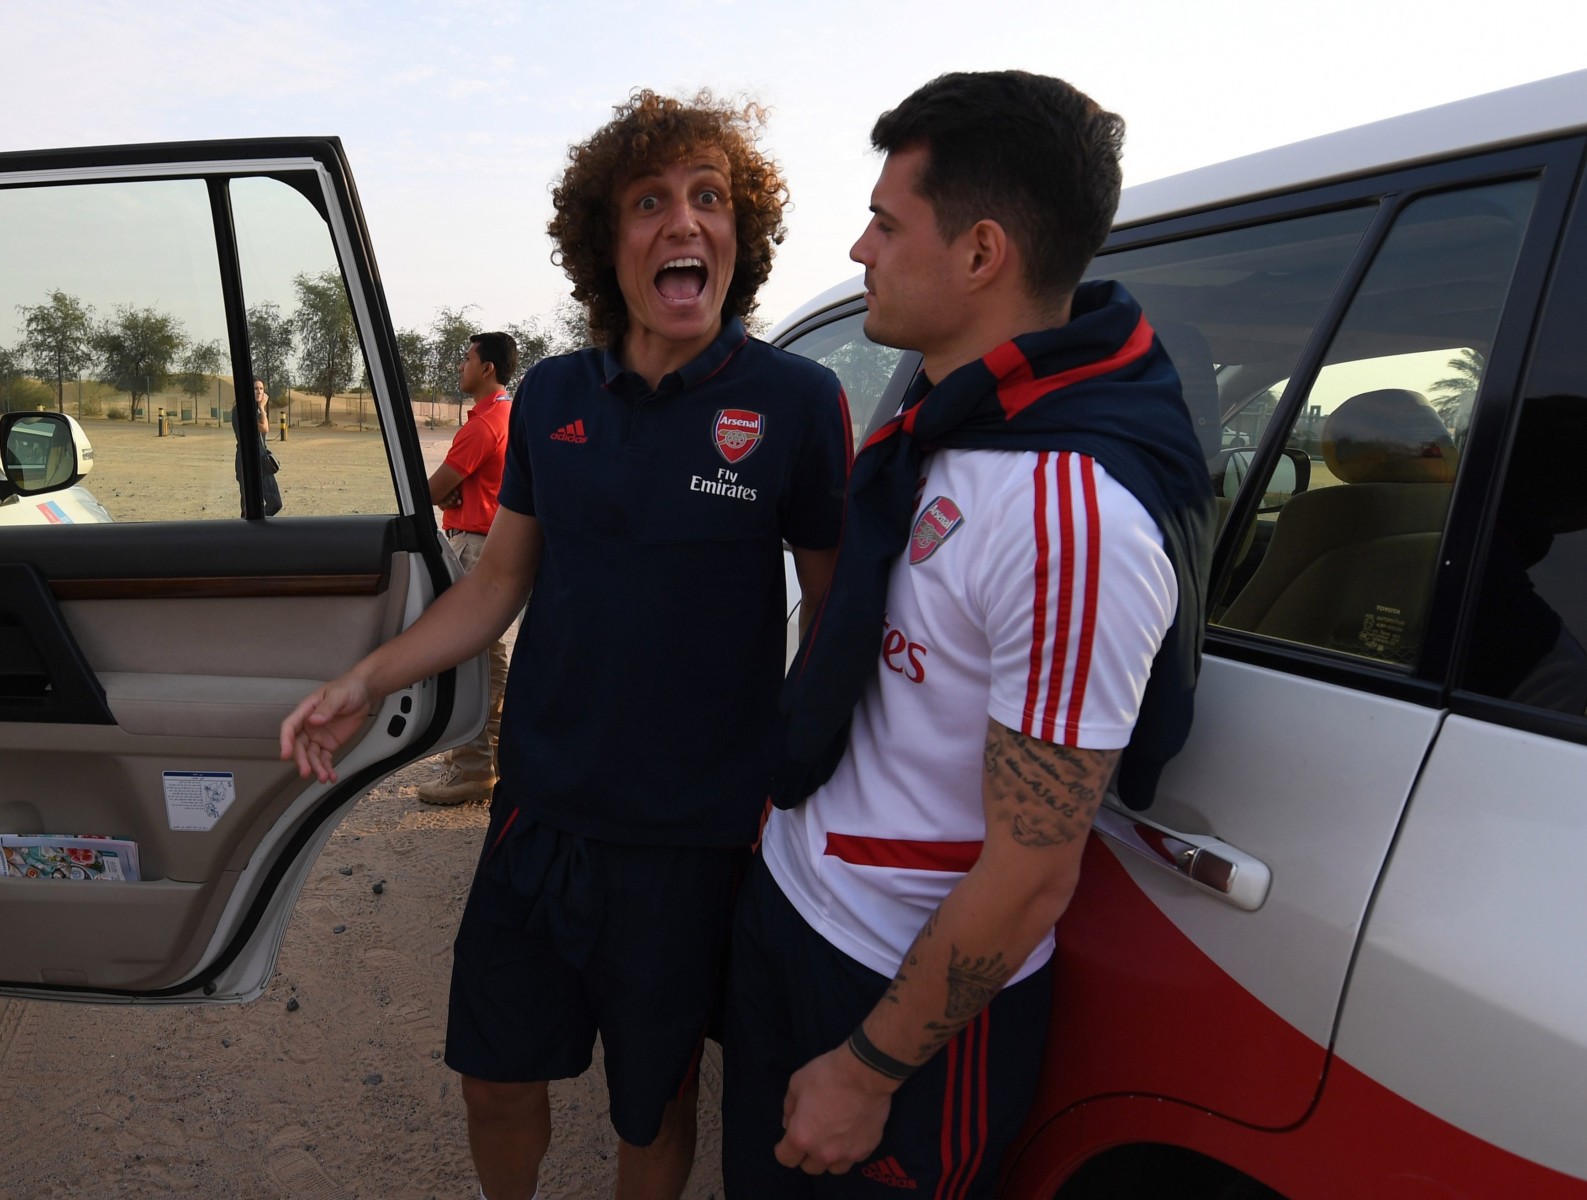 David Luiz and Granit Xhaka, here shown out in Dubai with Arsenal in February, have now been seen having a get-together during the lockdown